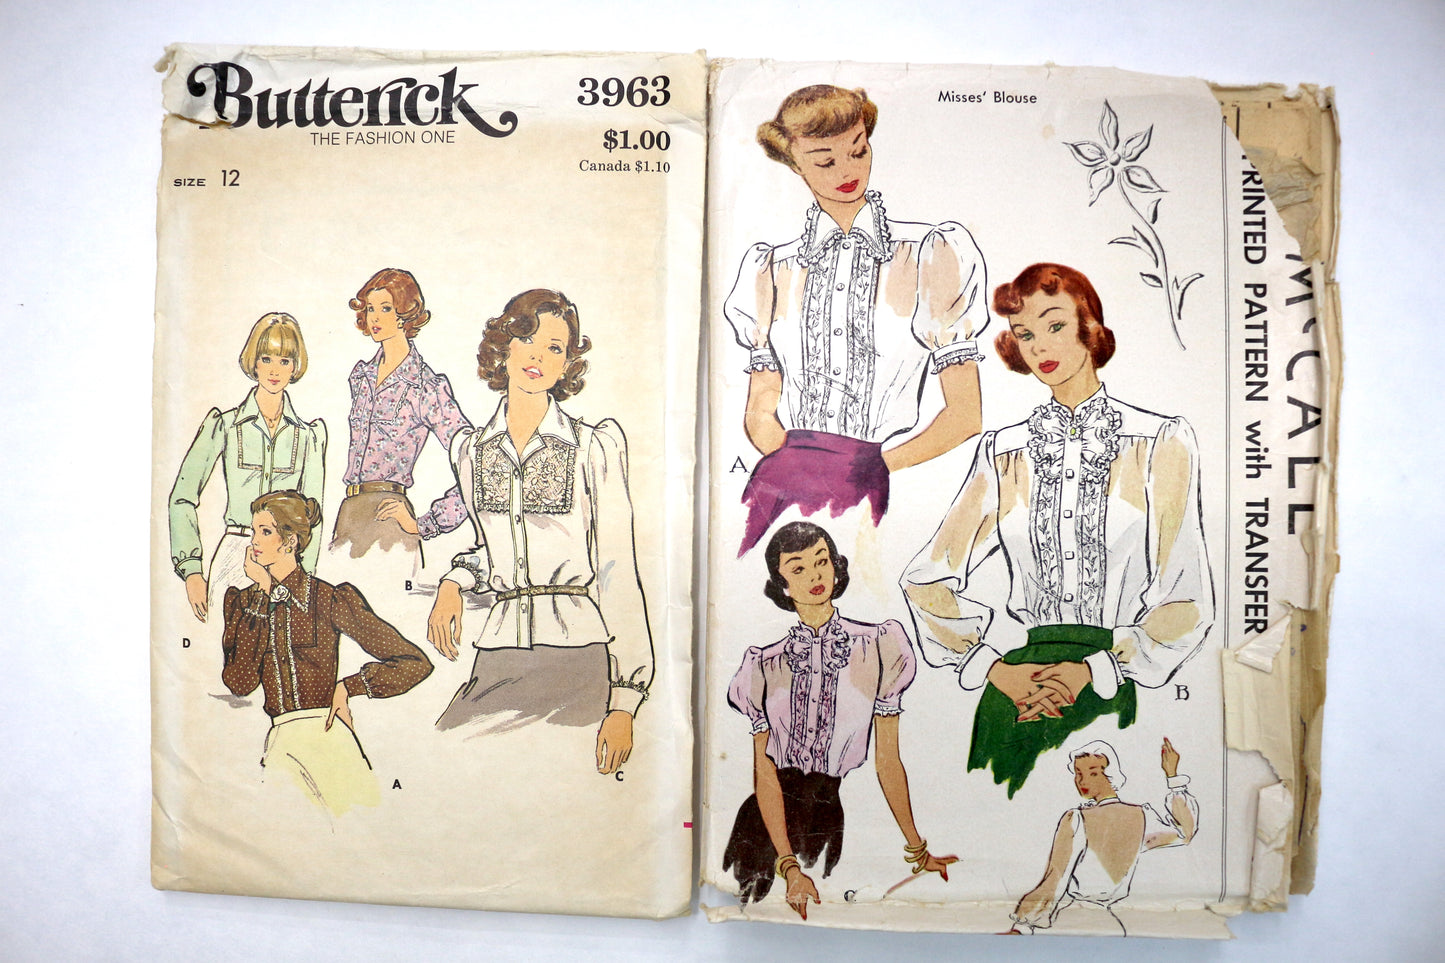 Butterick 3963 Womens Blouse Sewing Pattern or McCalls 1458 Womens Blouse Sewing Pattern